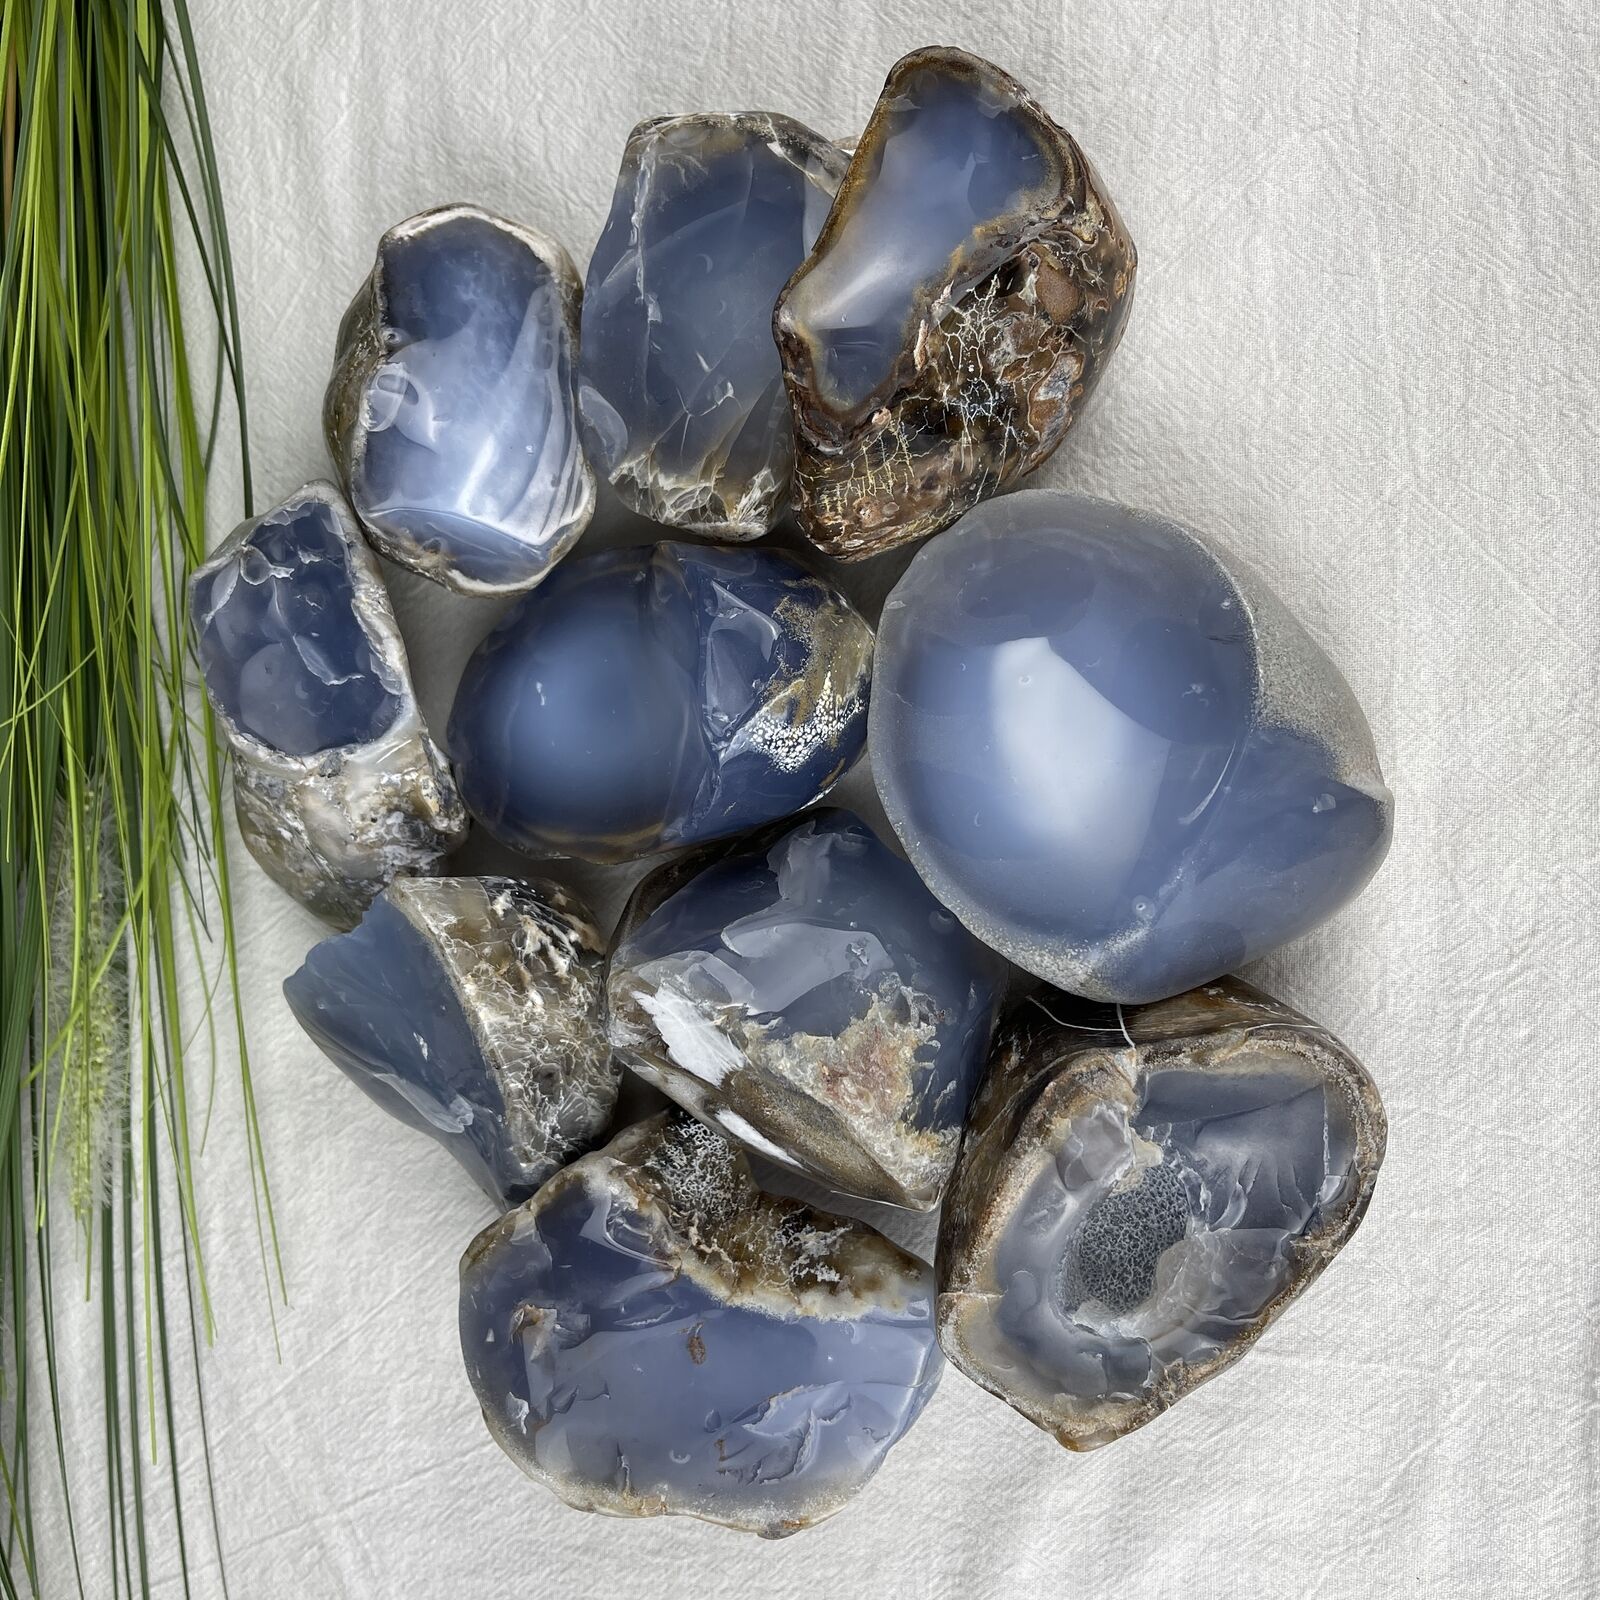 6LB  Rough Polished Blue Chalcedony Stone Polished Raw Blue Agate Rock Minerals